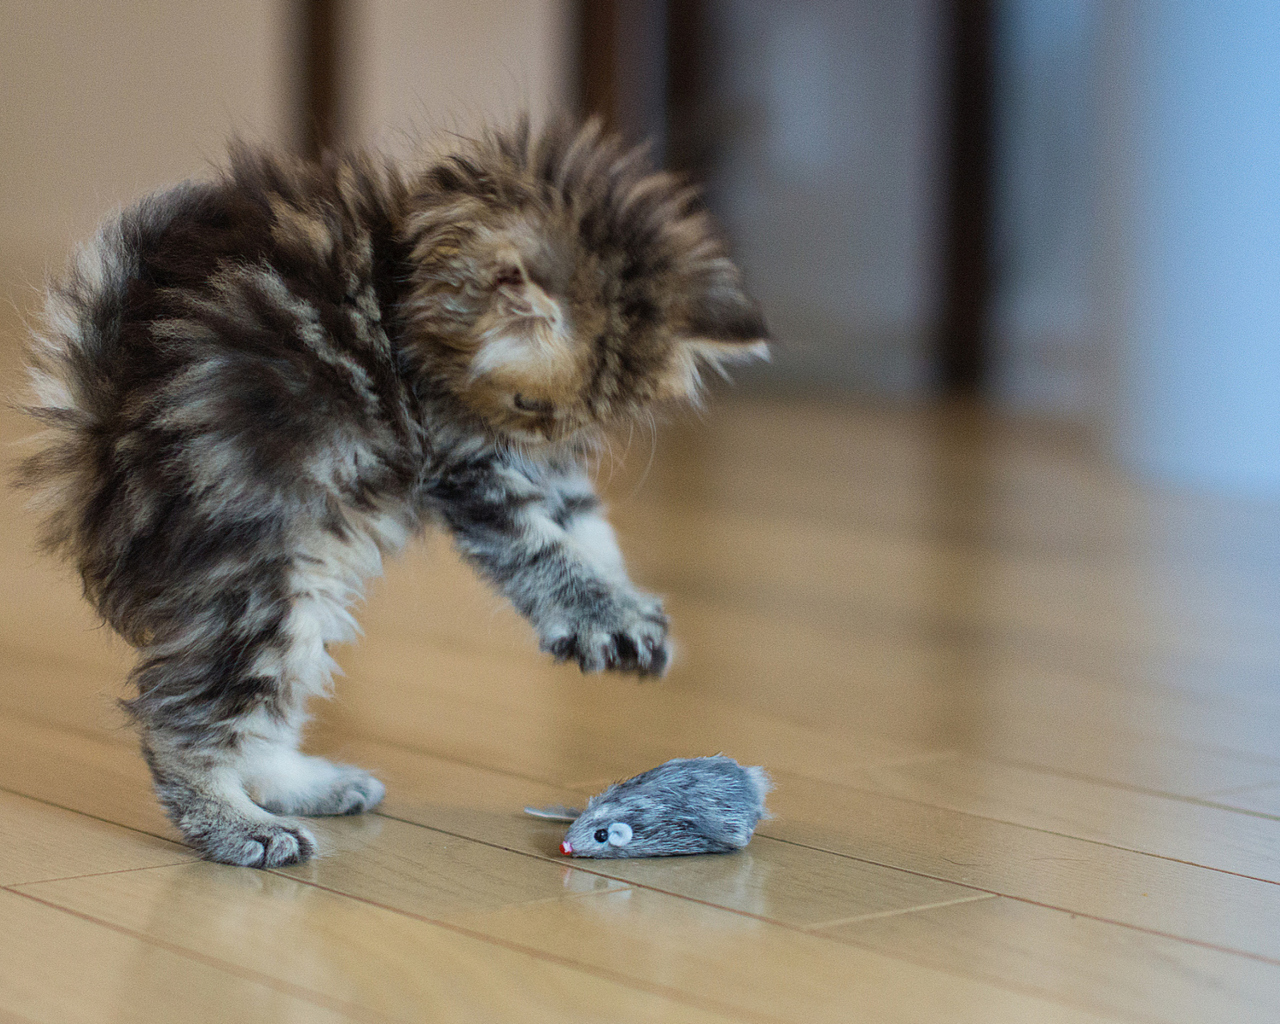 Funny Kitten Playing With Toy Mouse wallpaper 1280x1024